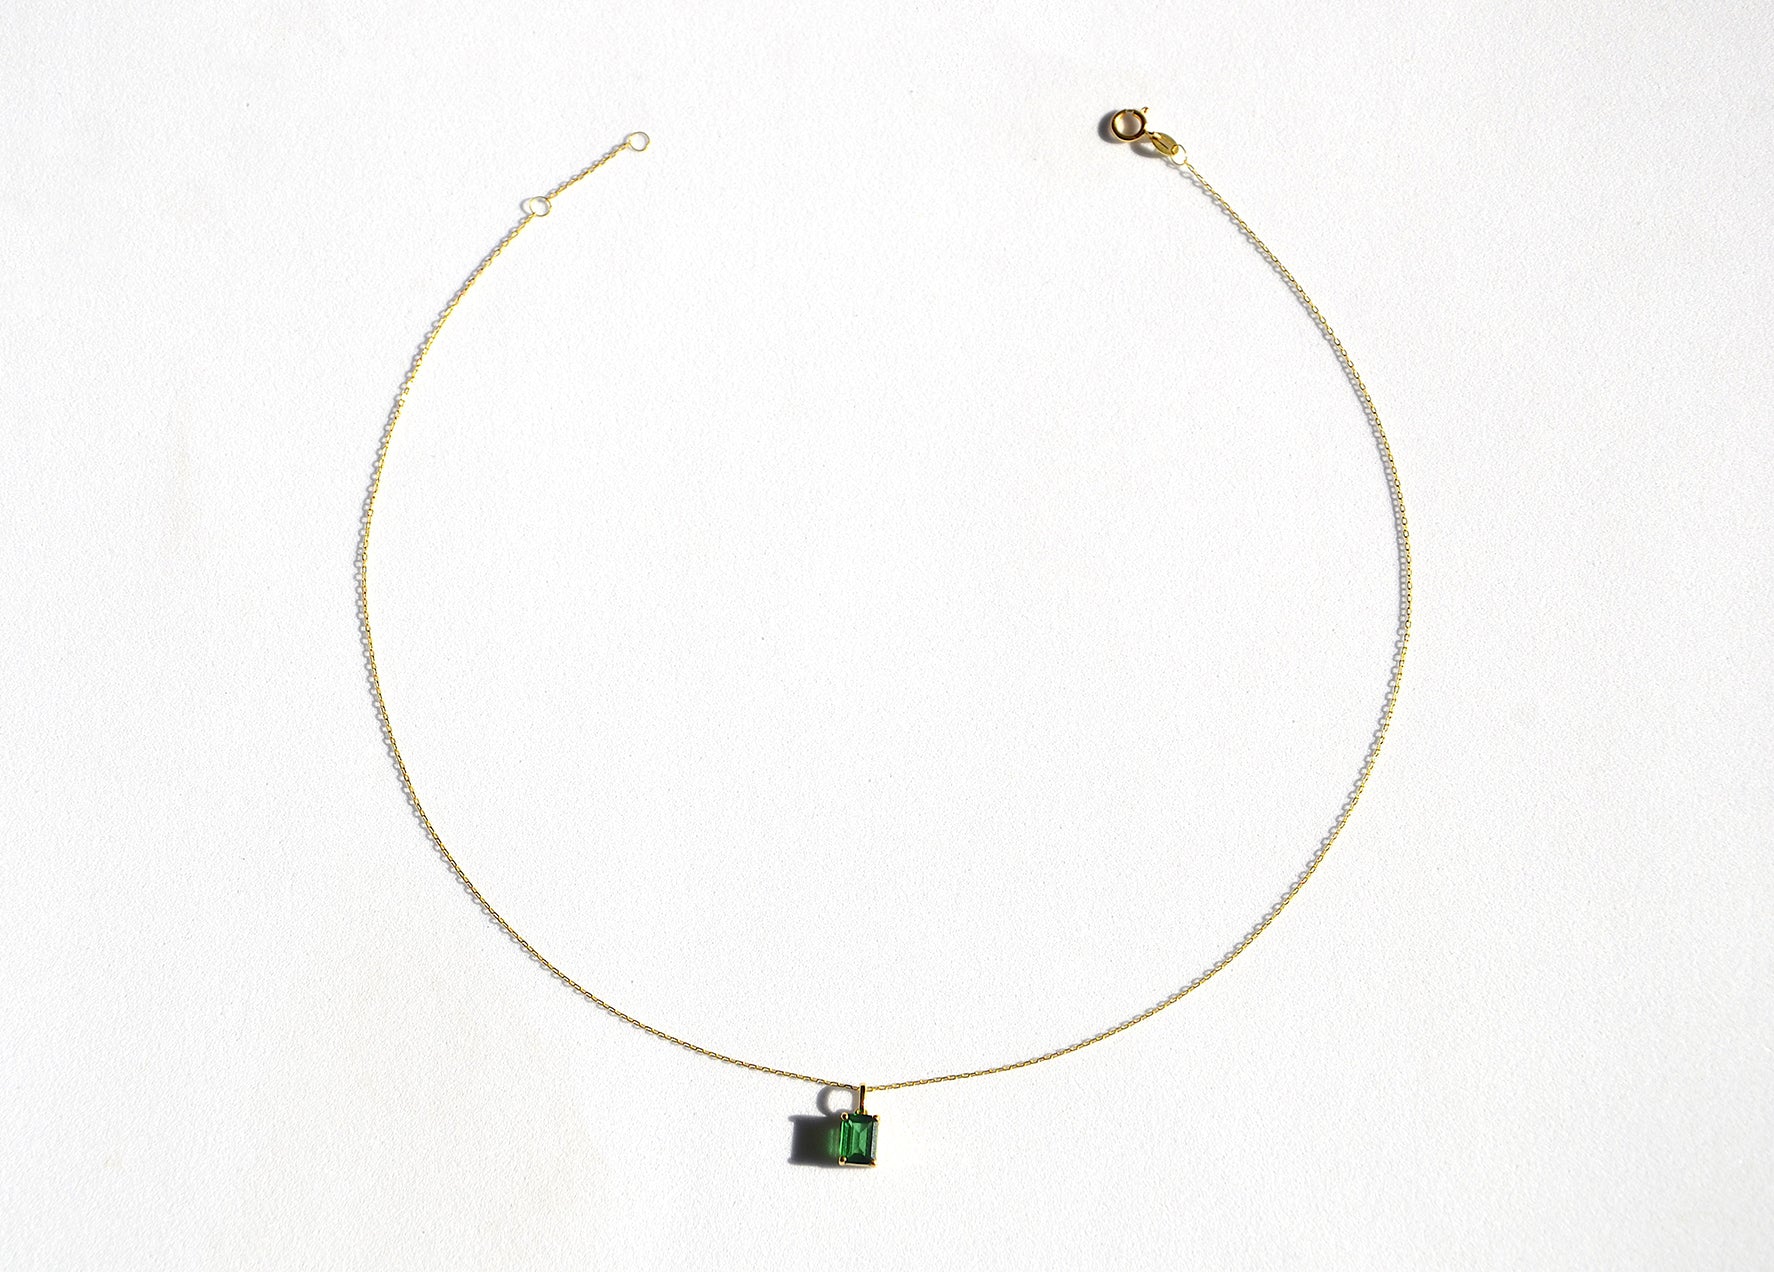 Filigran golden 18k necklace with an Emerald stone pendant in40 cm with 4 cm extension.